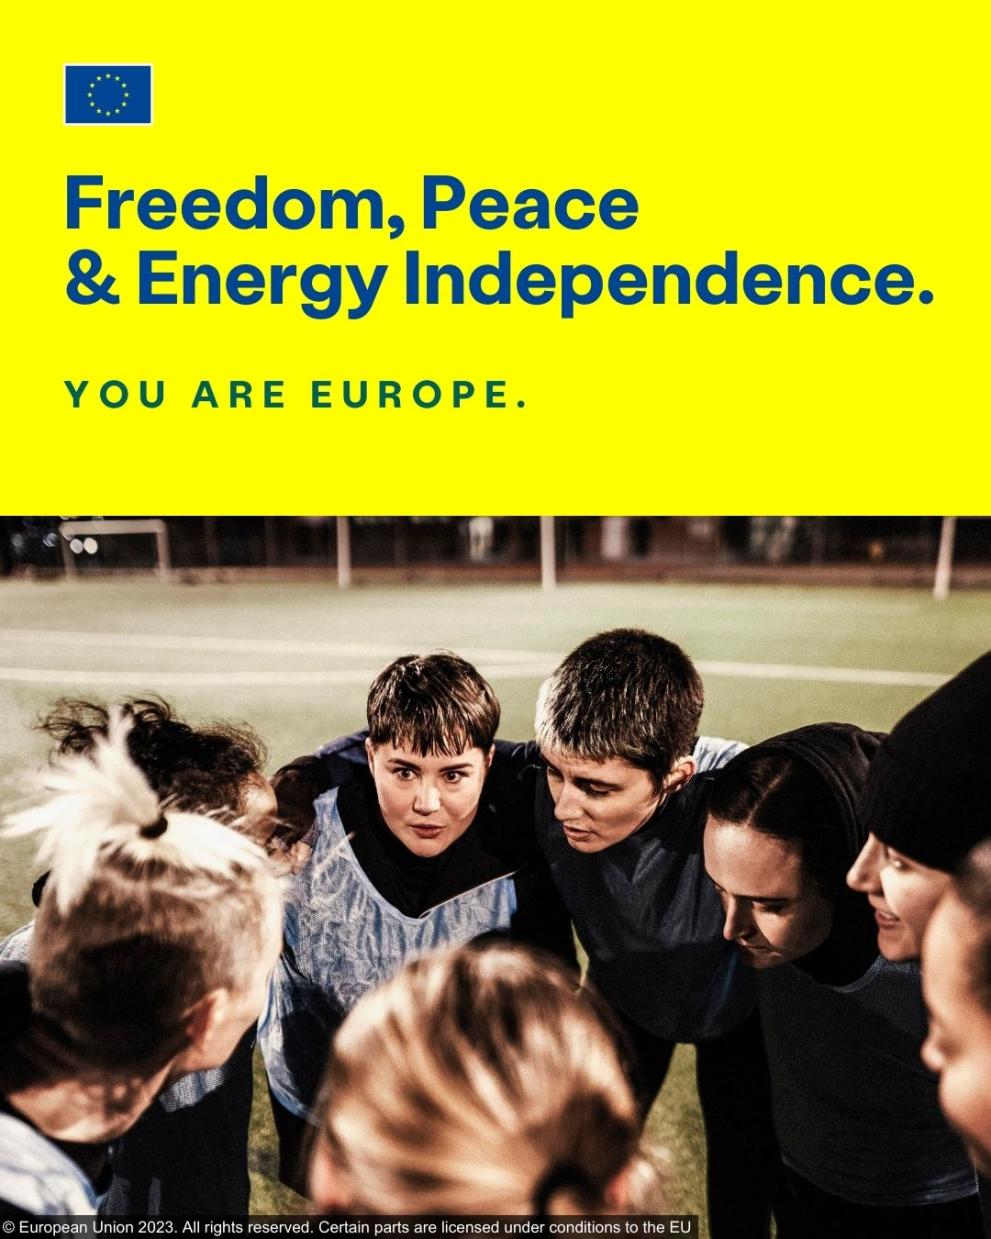 Freedom, Peace and Energy Independence.